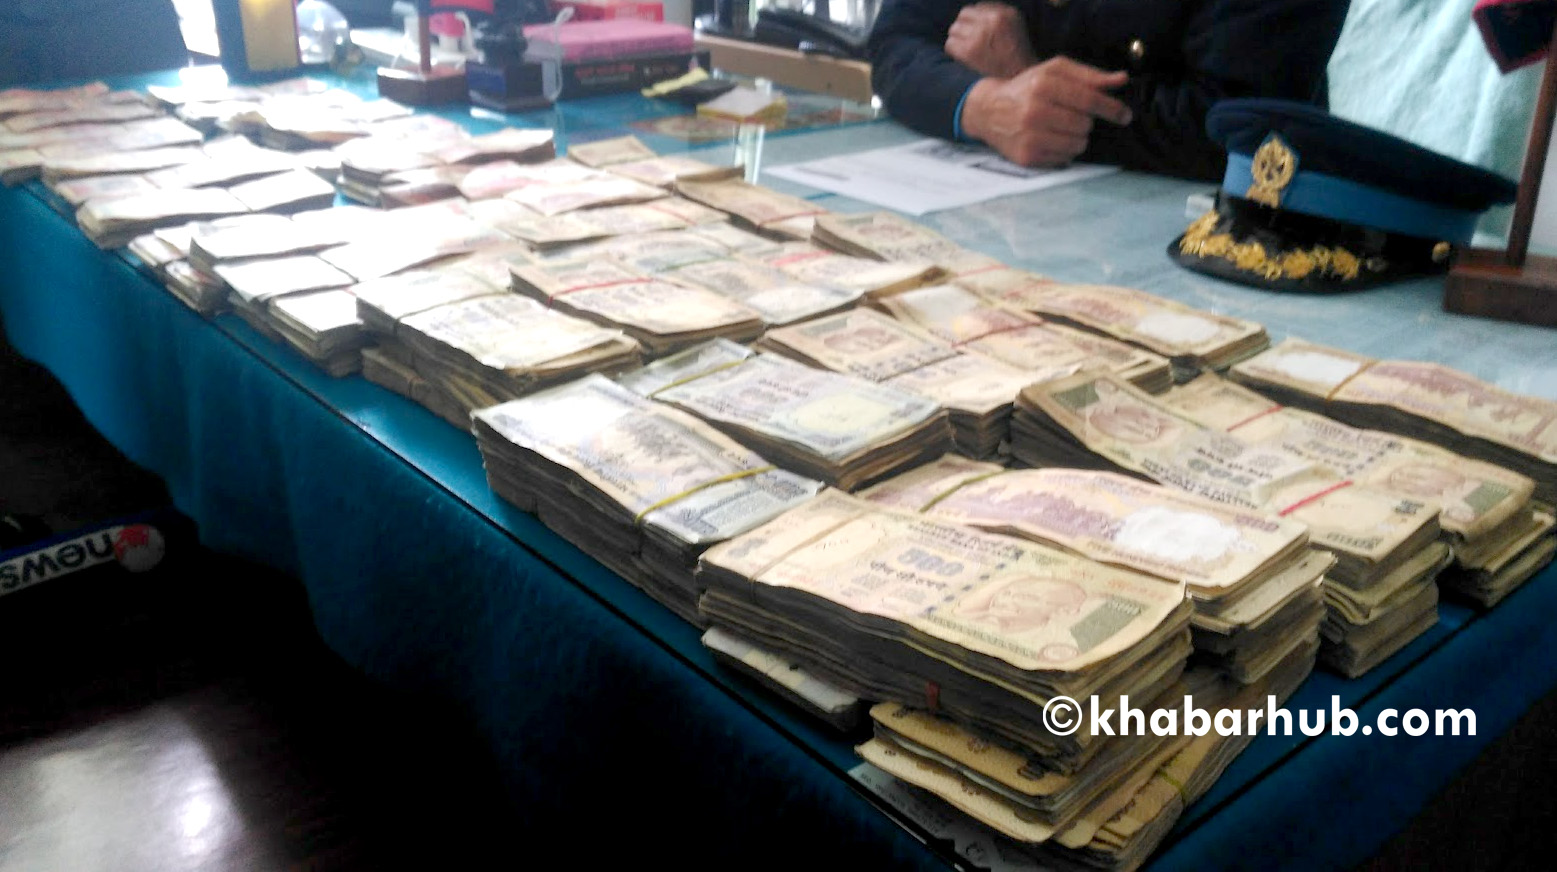 Two arrested with fake Indian currency in Nepal